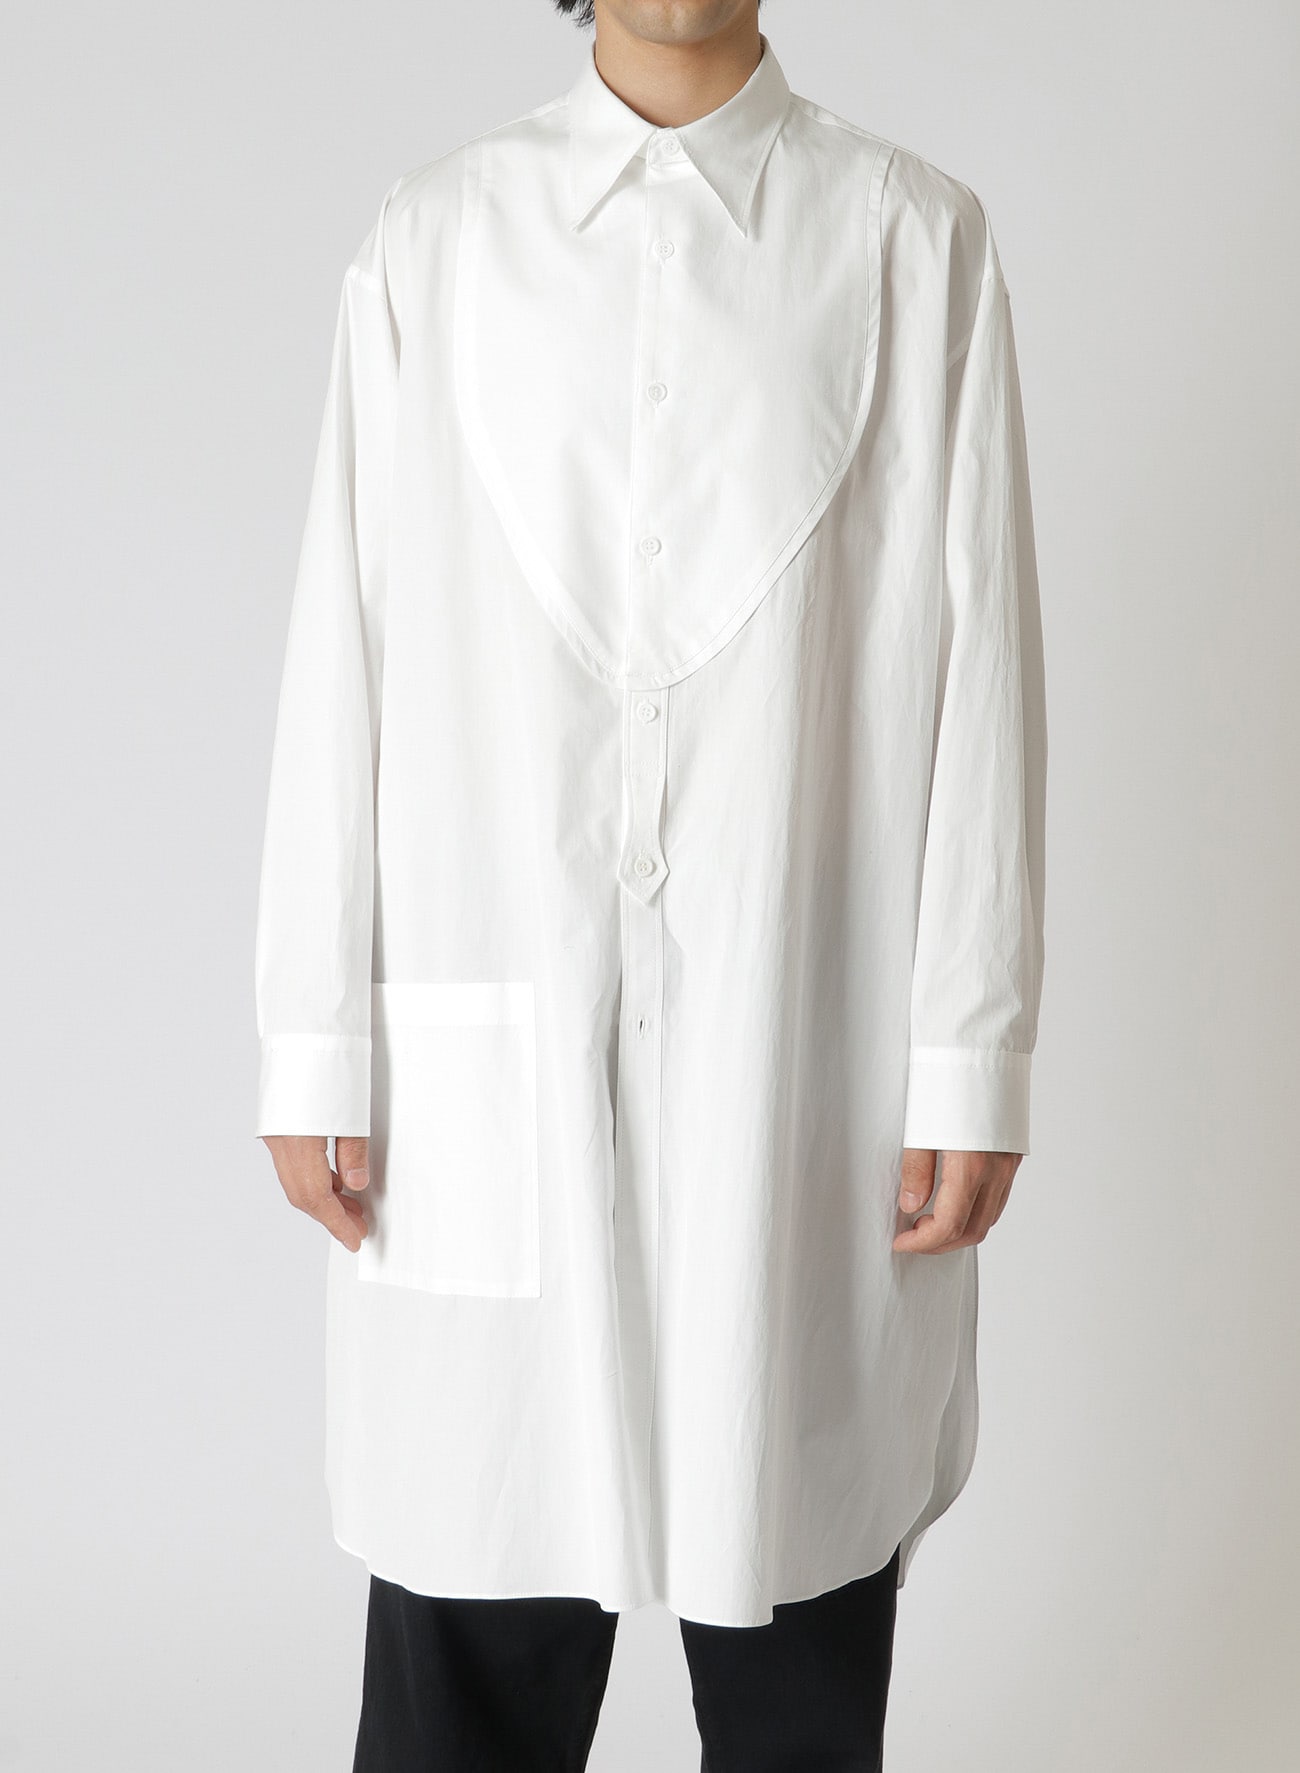 WA.T BROAD M-PATCH SPARE COLLAR BIG B(XS White): power of the 